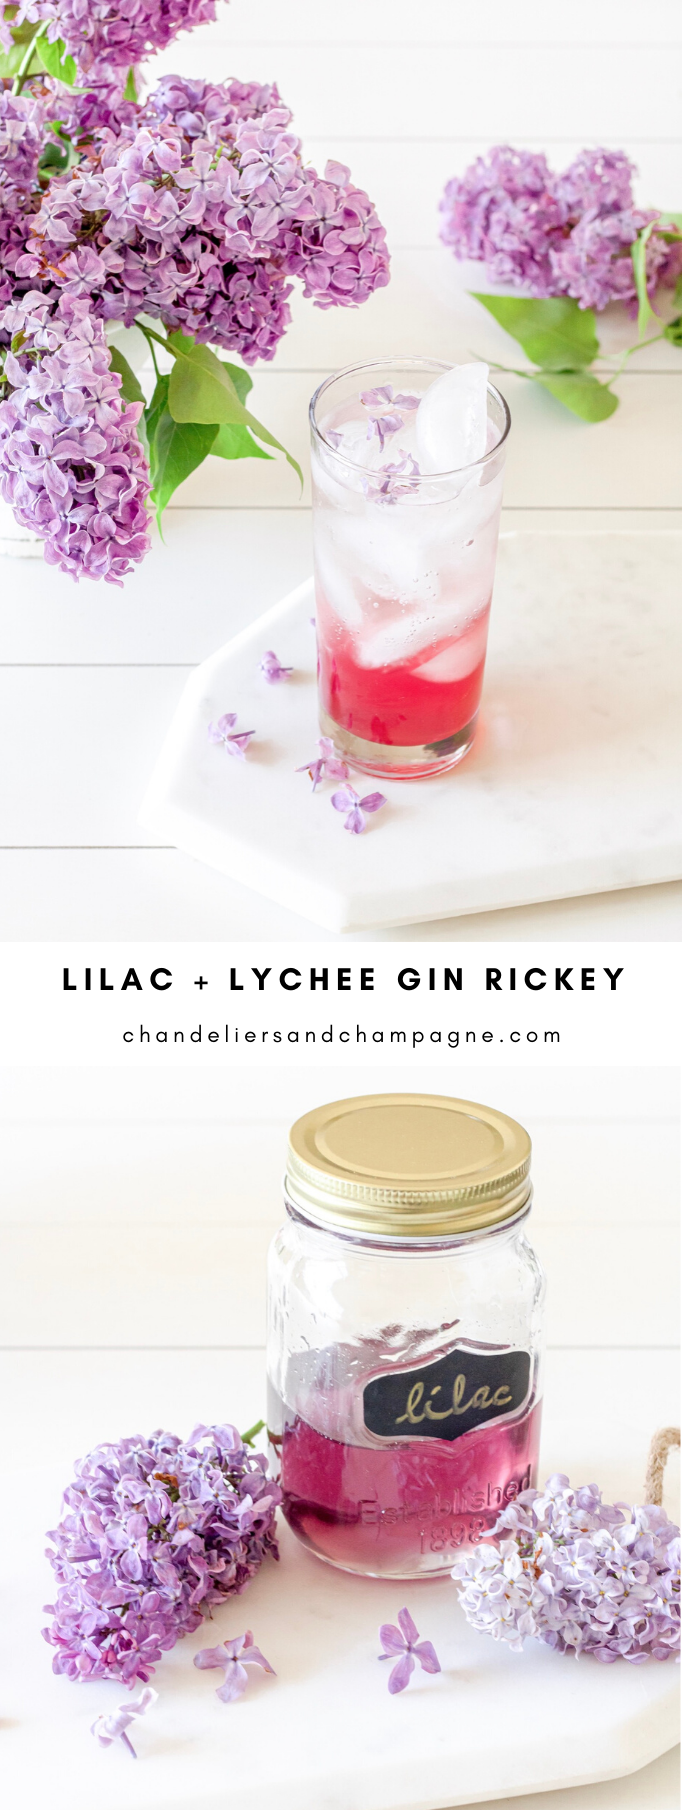 sumer cocktail recipe: Lilac and Lychee Gin Rickey 